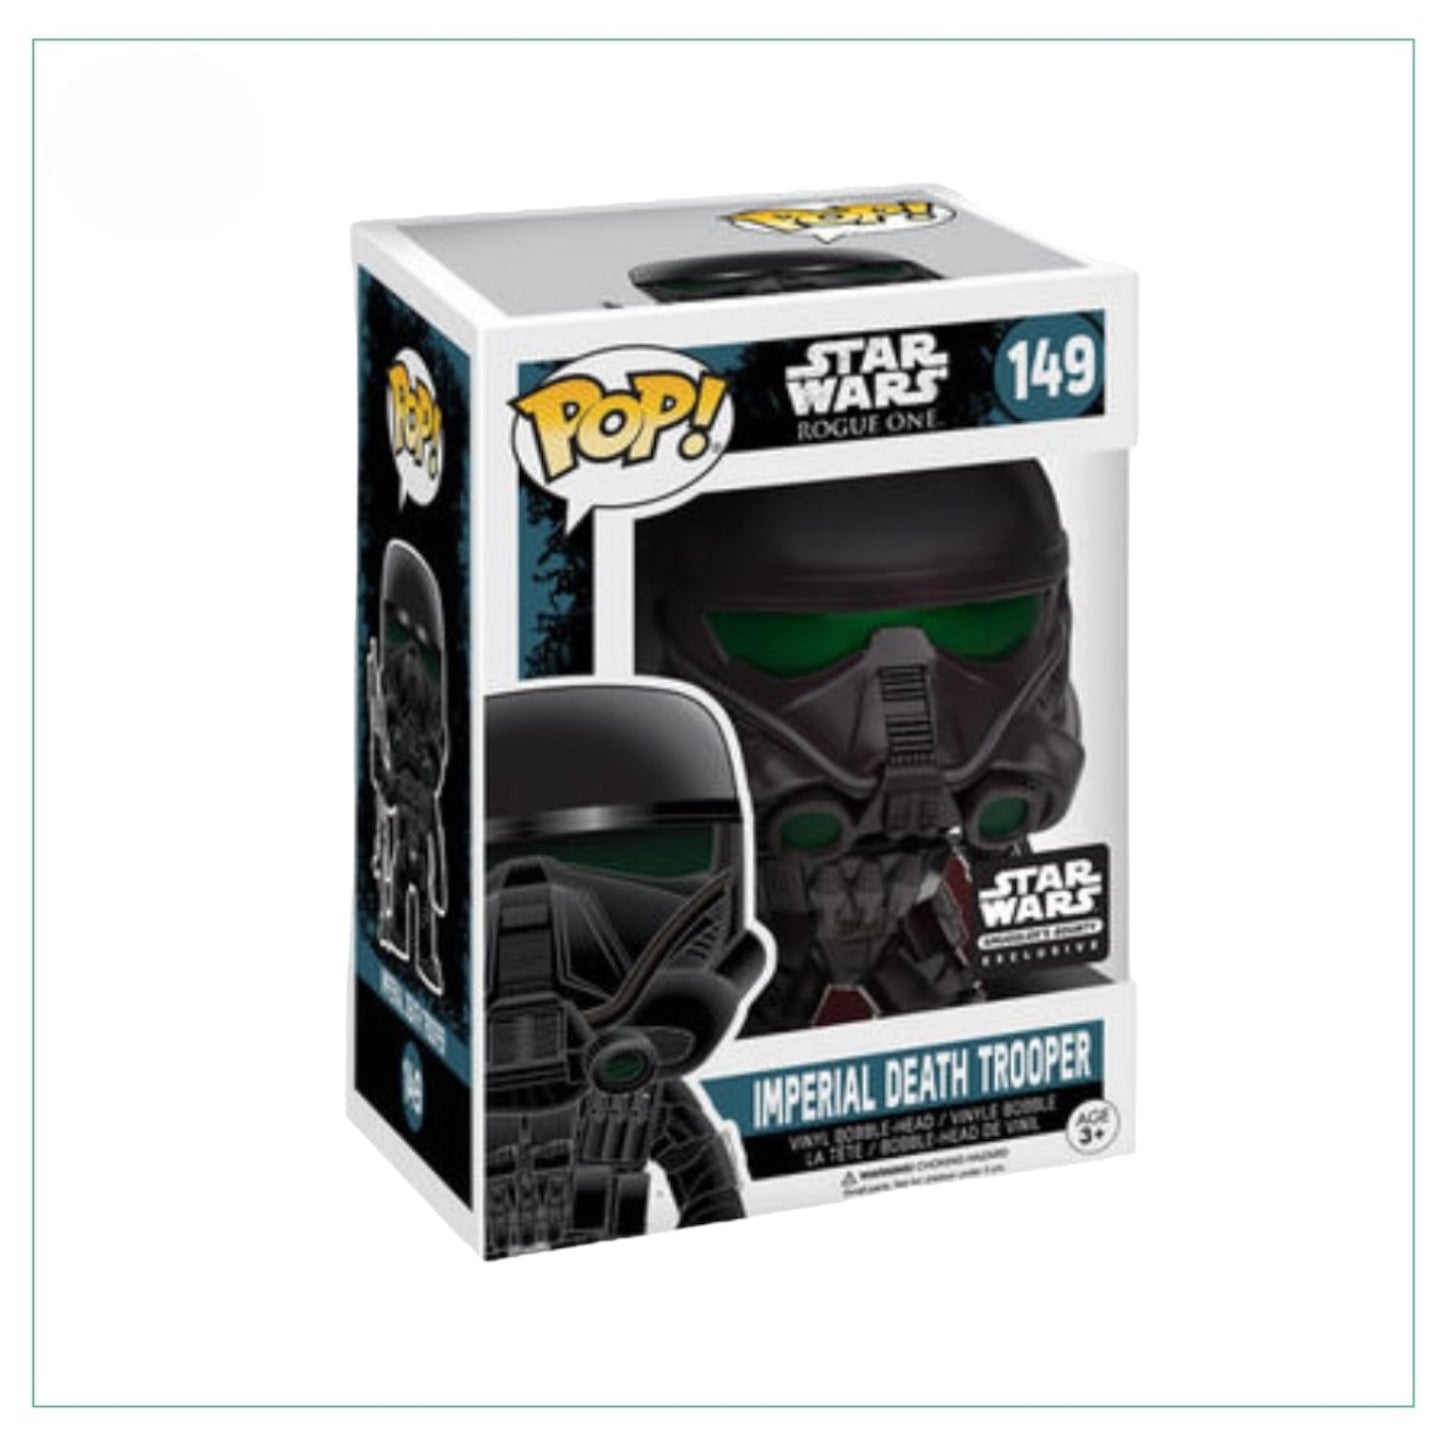 Imperial Death Trooper #146 Funko Pop! - Star Wars Rogue One - Smuggler's Bounty Exclusive - Angry Cat